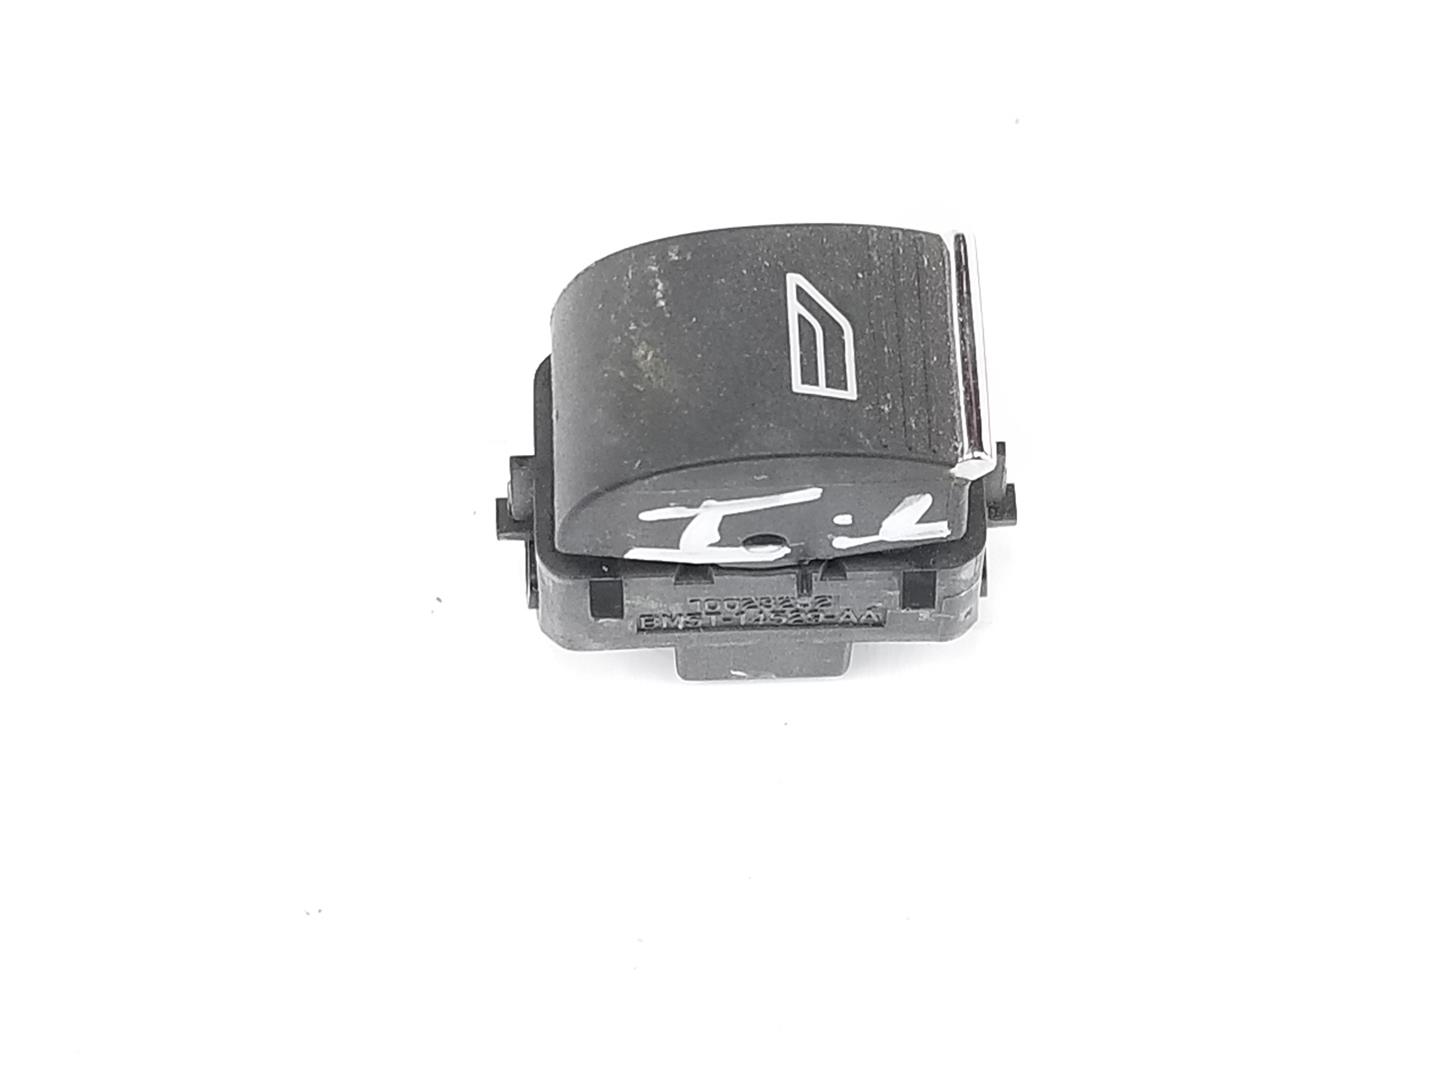 FORD C-Max 2 generation (2010-2019) Rear Right Door Window Control Switch 1850432, F1ET14529AA 20775968